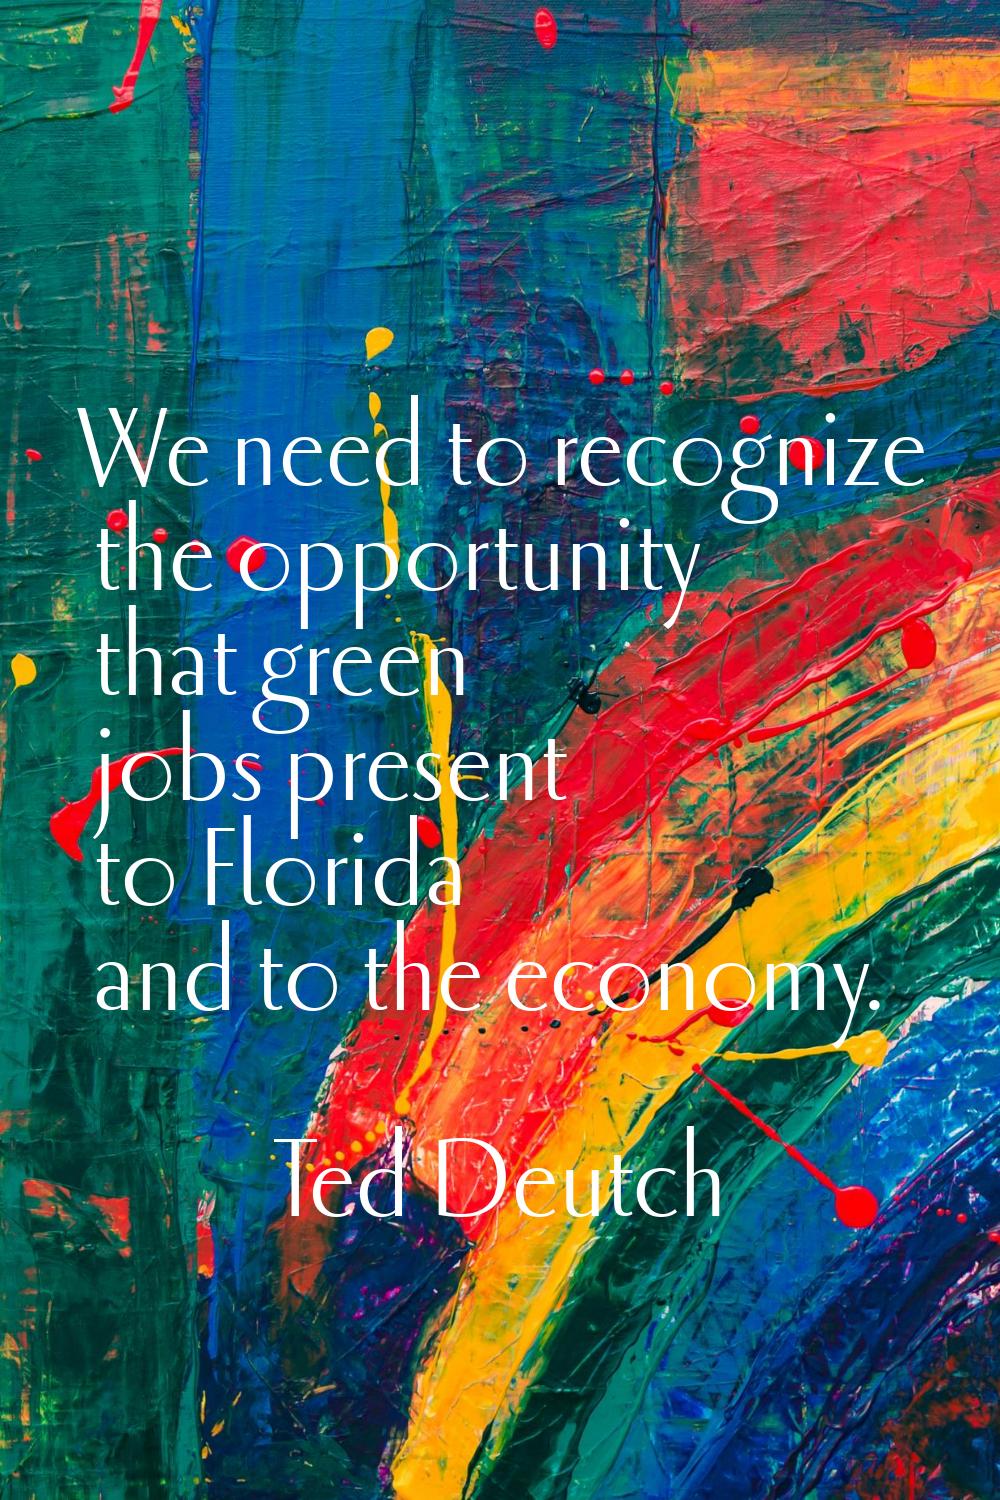 We need to recognize the opportunity that green jobs present to Florida and to the economy.